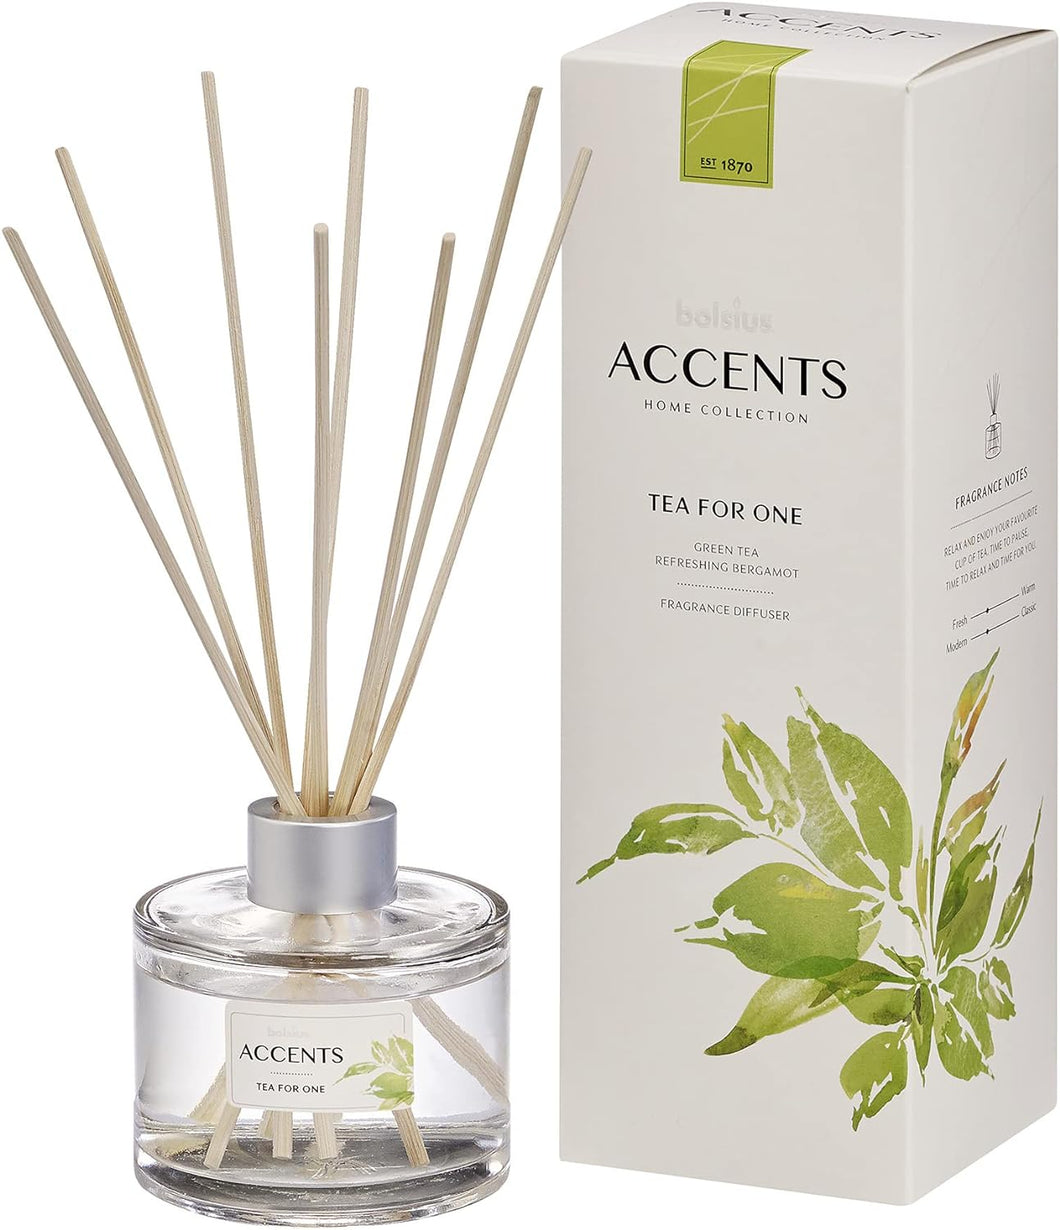 Bolsius Accents Fragrance Diffuser, Tea for One – 100ml